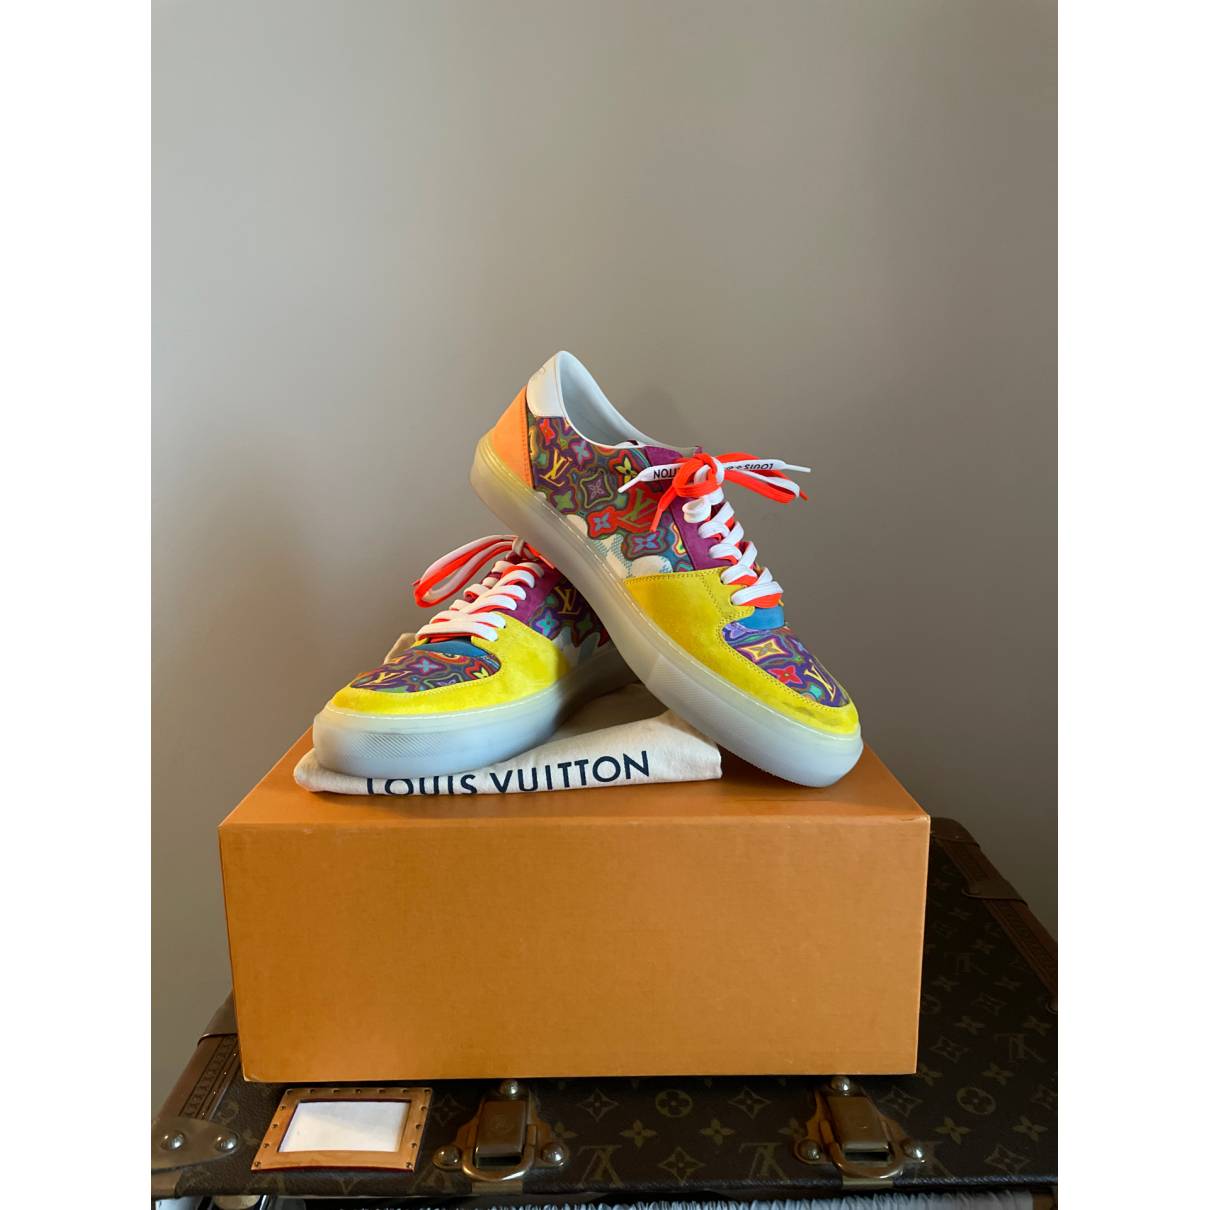 Louis Vuitton Ollie cloth low trainers Sneakers - Yellow Sneakers, Shoes -  LOU573844